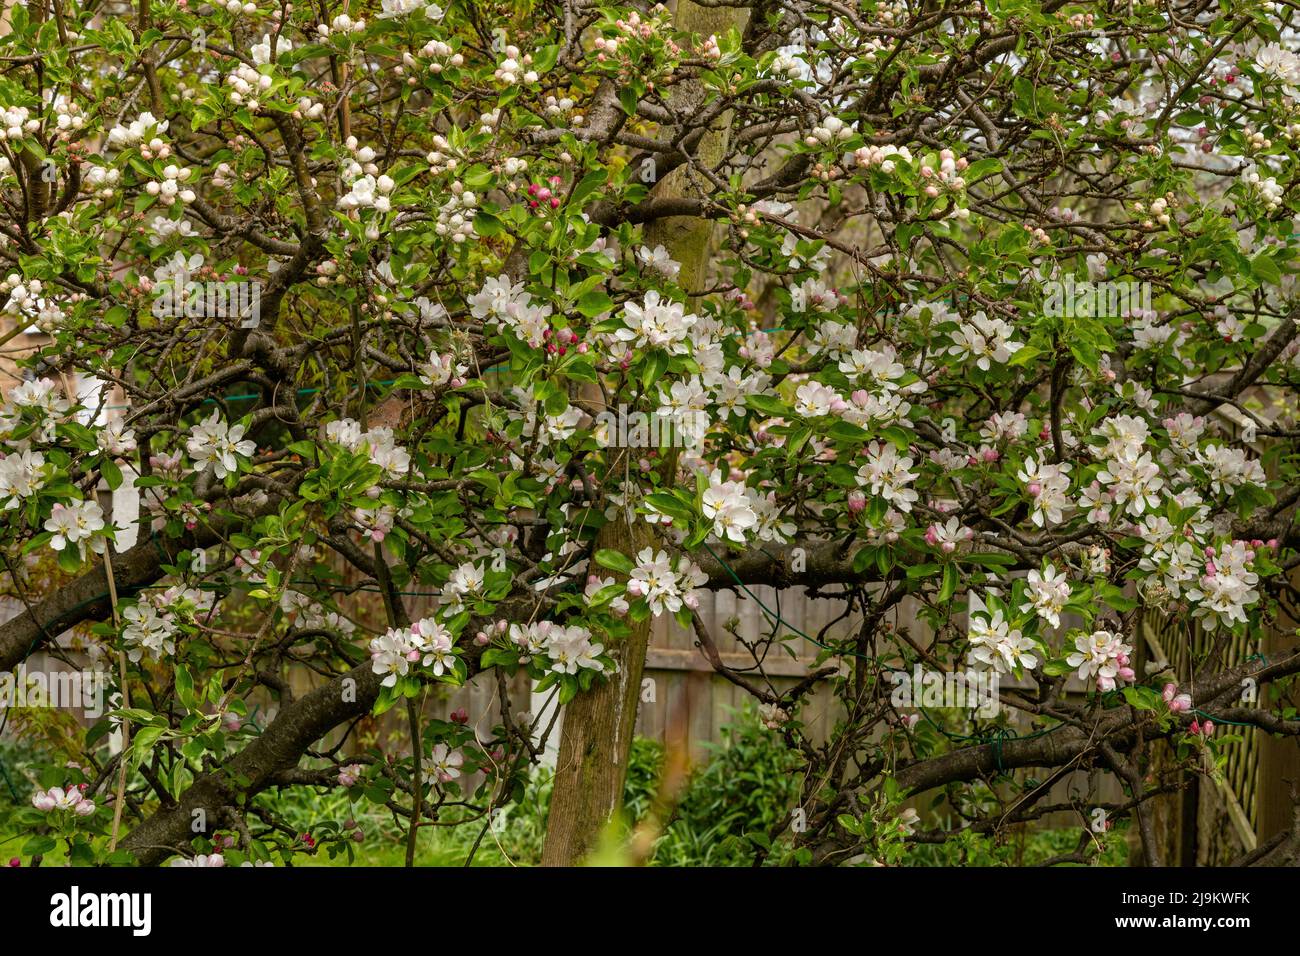 Fan trained apple trees in blossom. Stock Photo